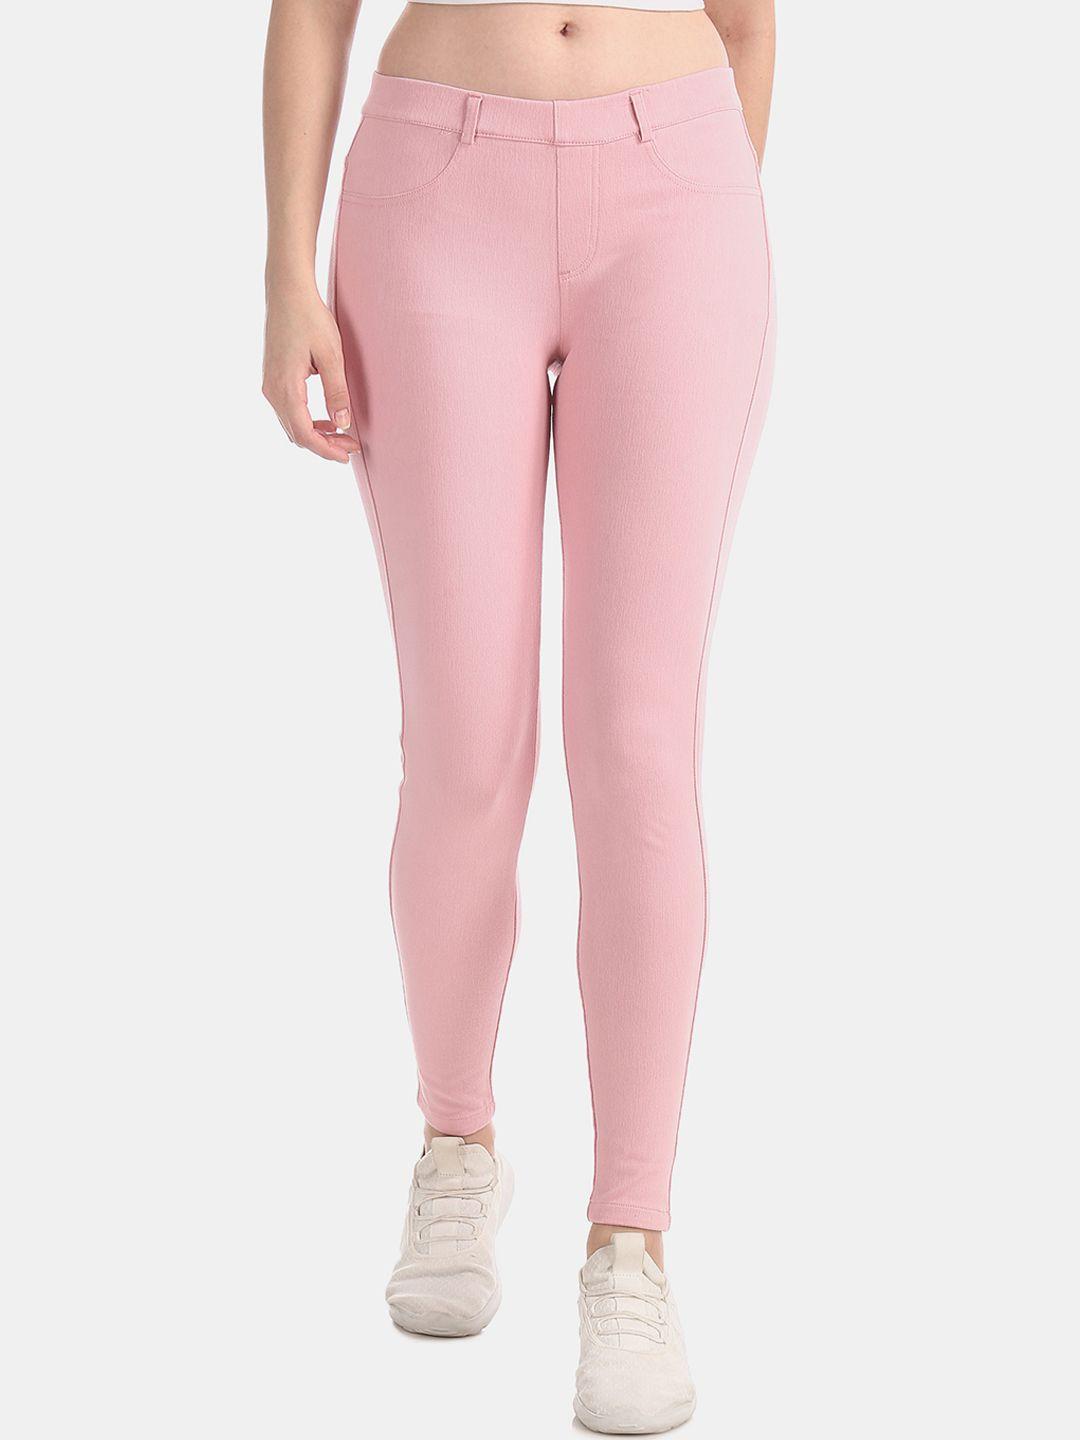 u.s. polo assn. women pink solid slim fit treggings